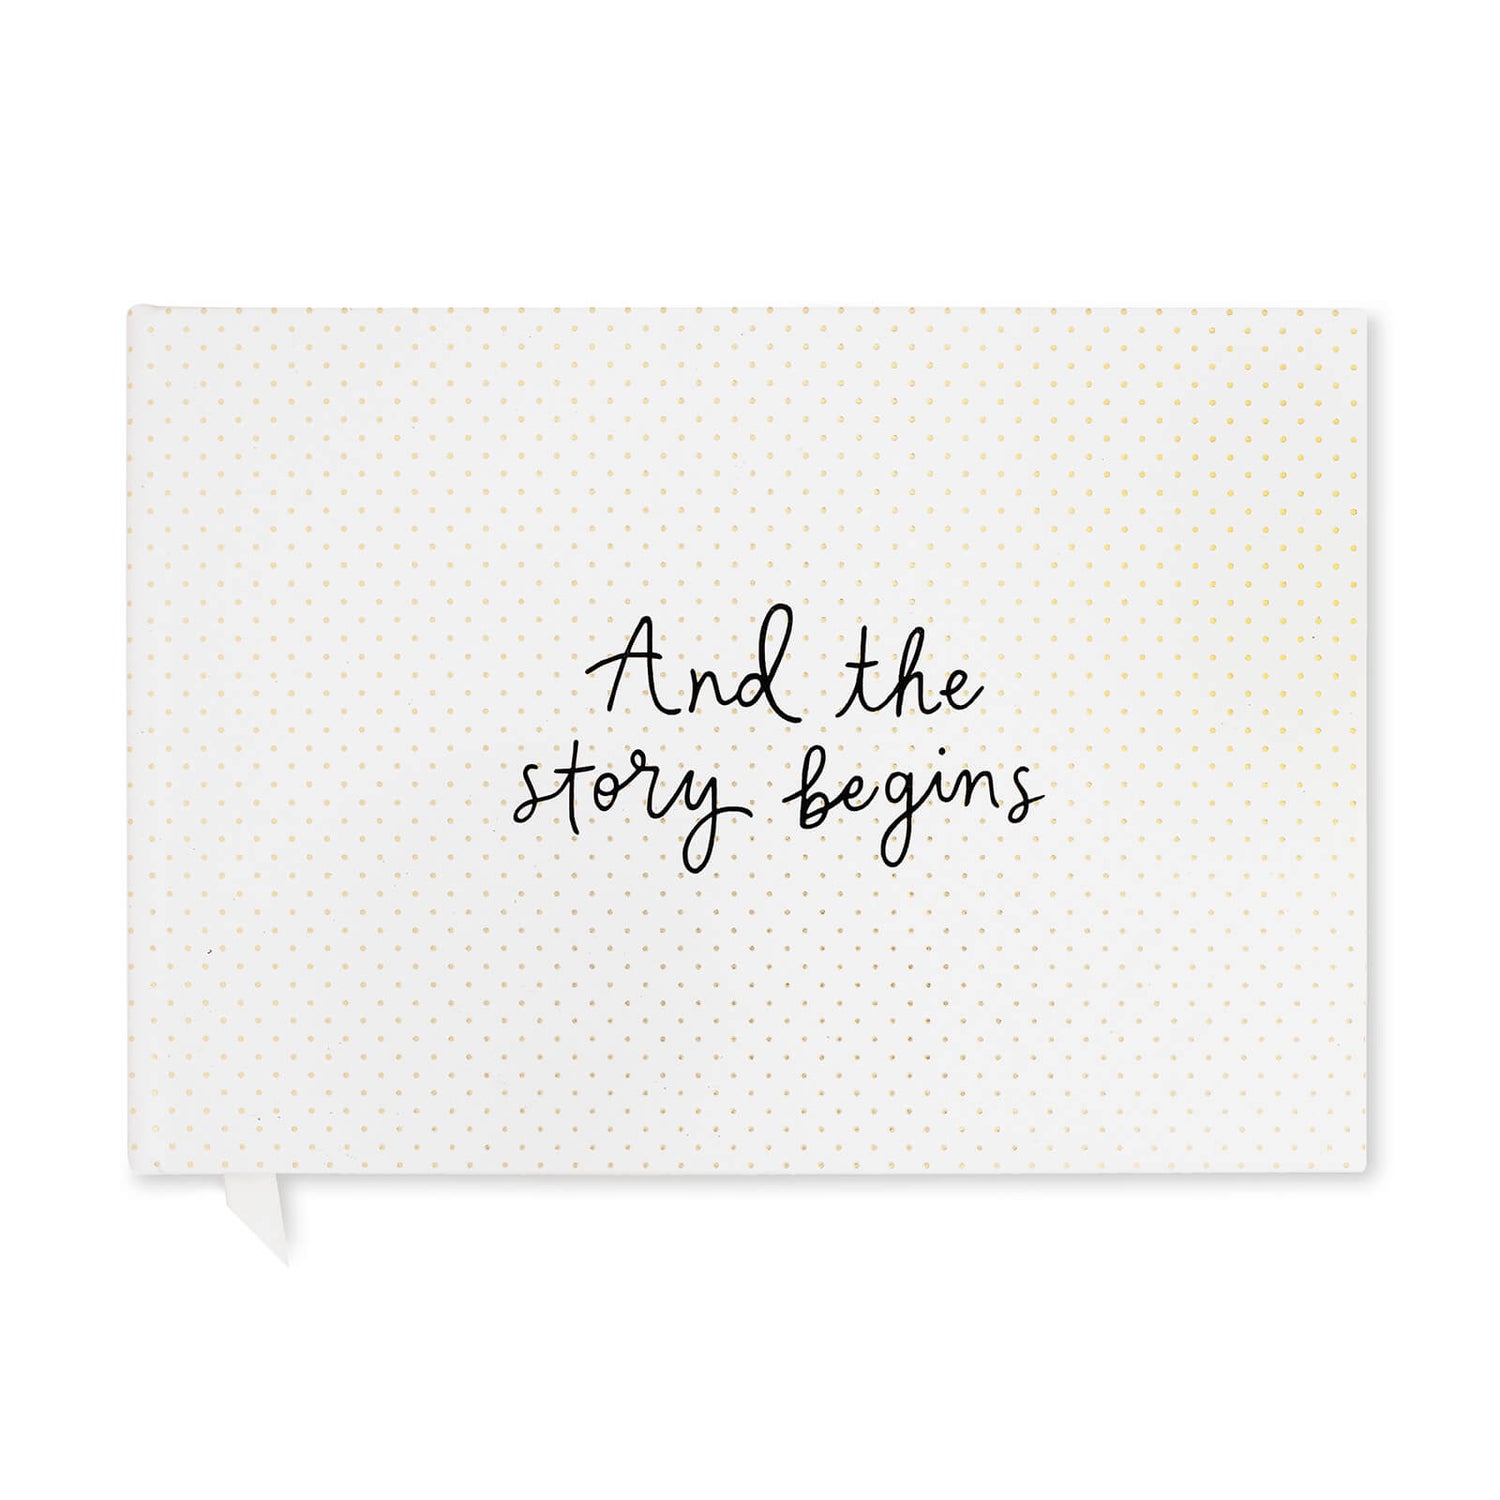 Kate Spade New York Bridal Guest Book - And the Story Begins